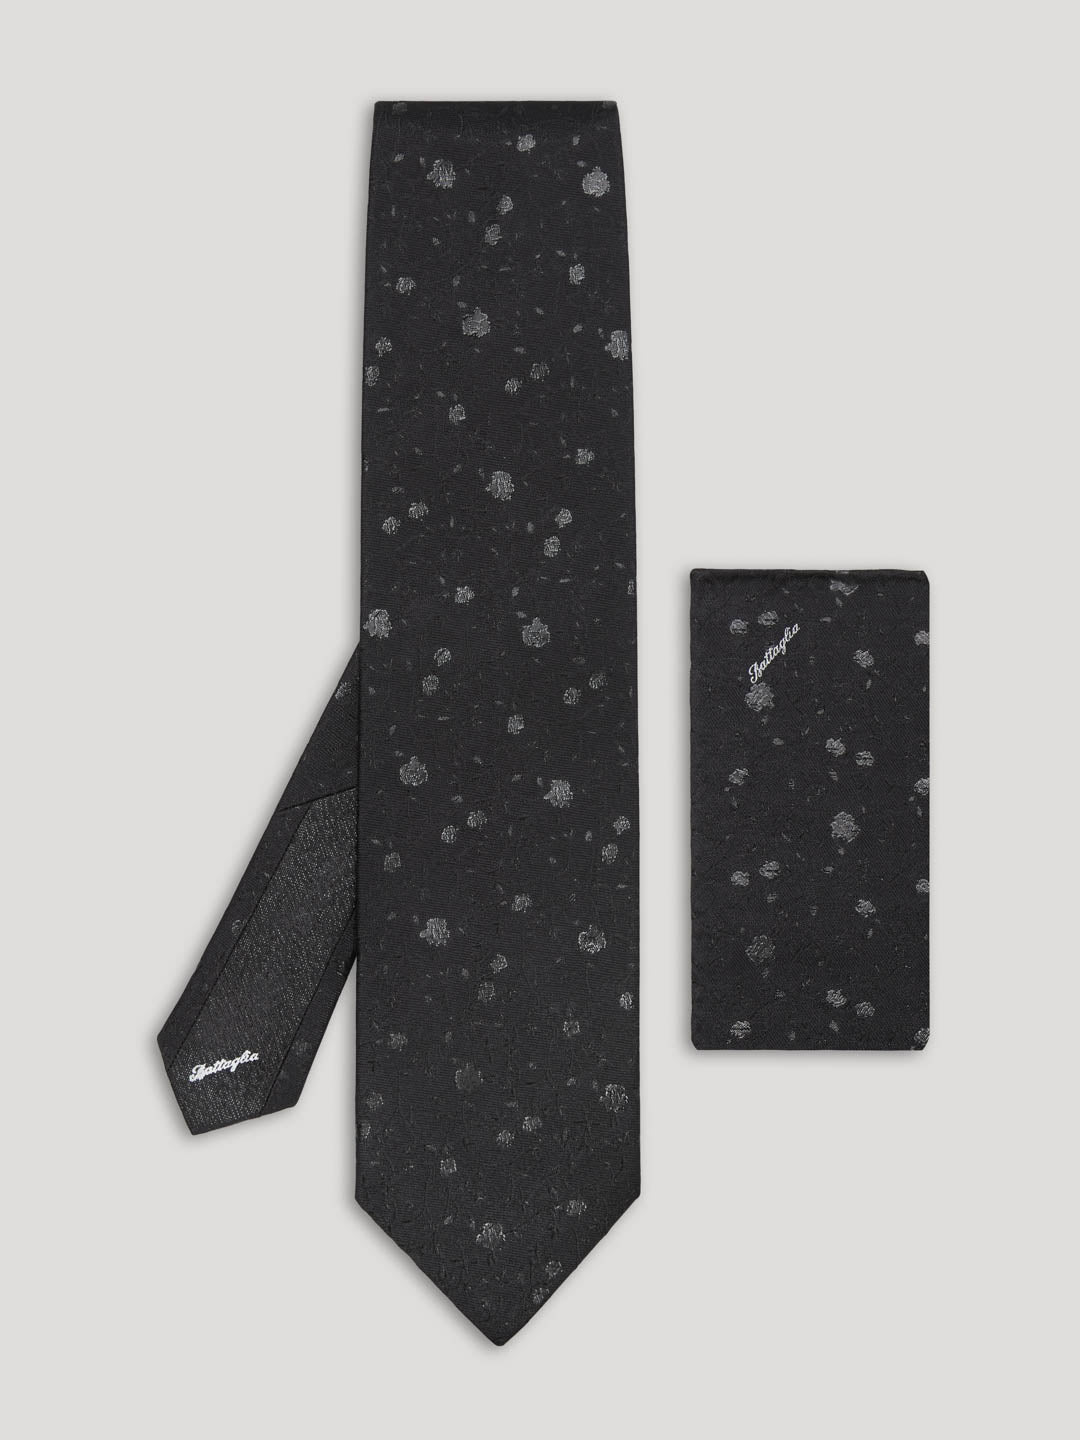 Black silk tie with silver floral details and matching handkerchief. 